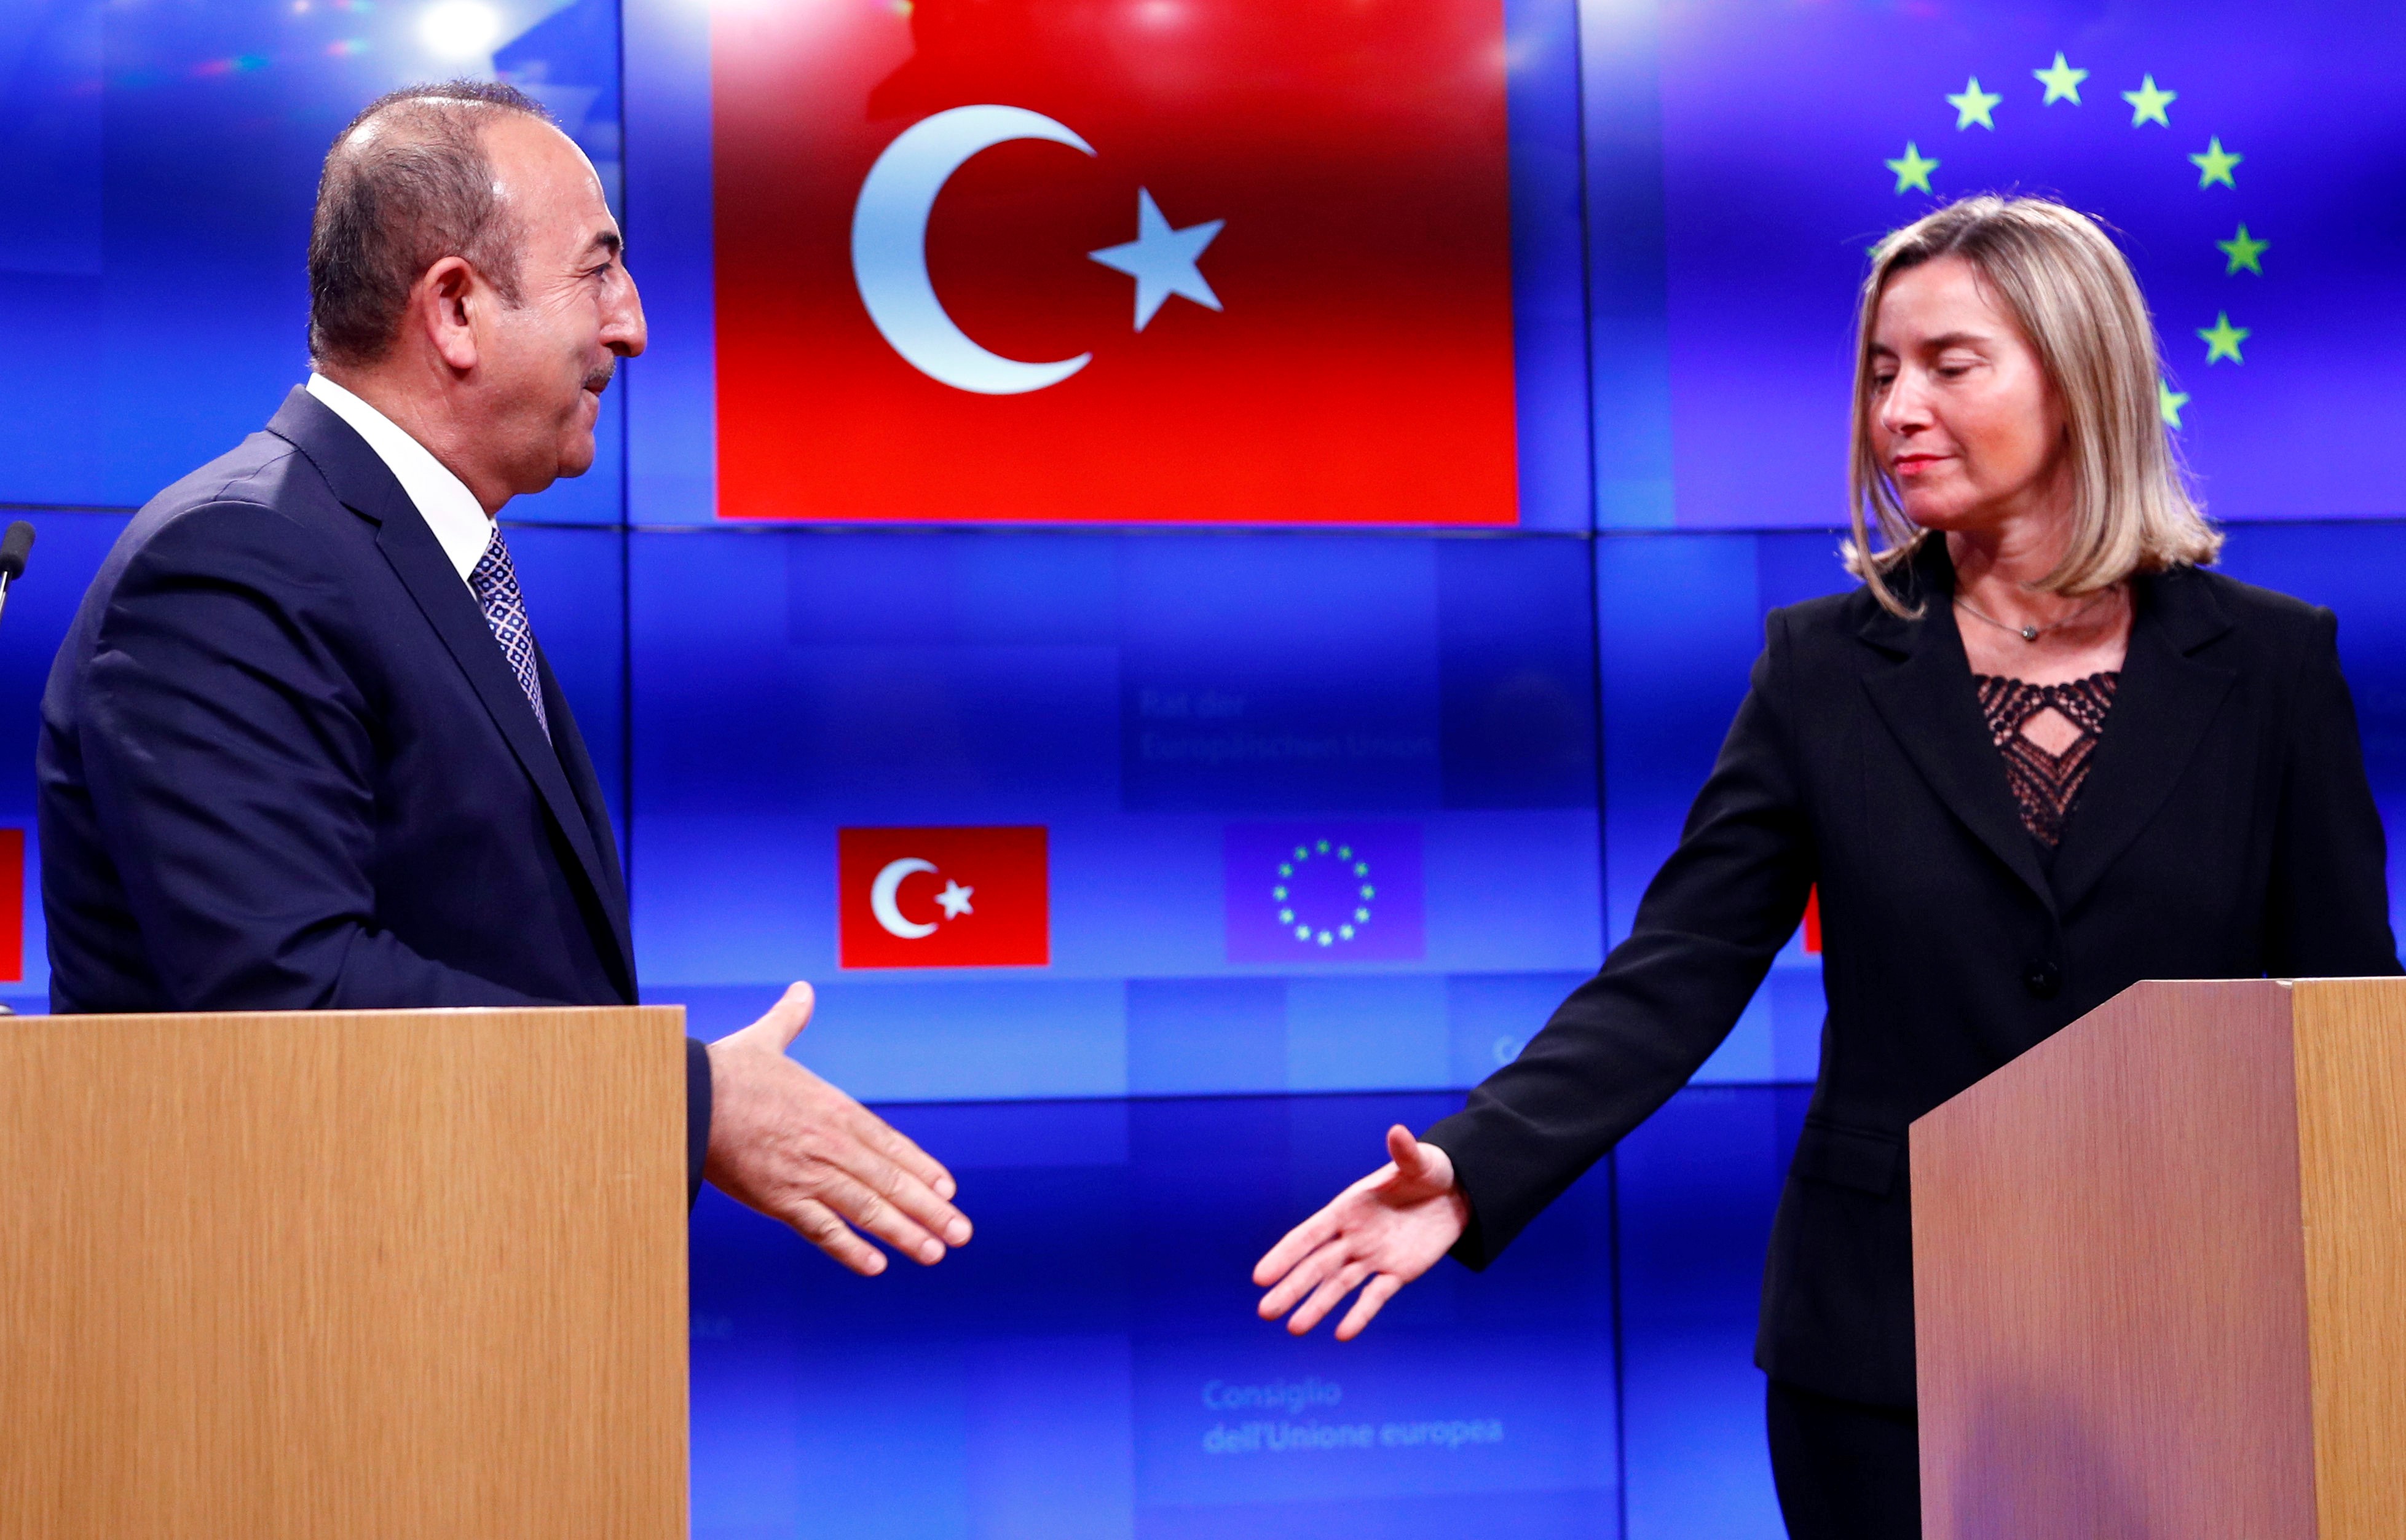  Turkish Foreign Minister Mevlut Cavusoglu shakes hands with European Union foreign policy chief Federica Mogherini  Belgium on 15 March (Reuters)